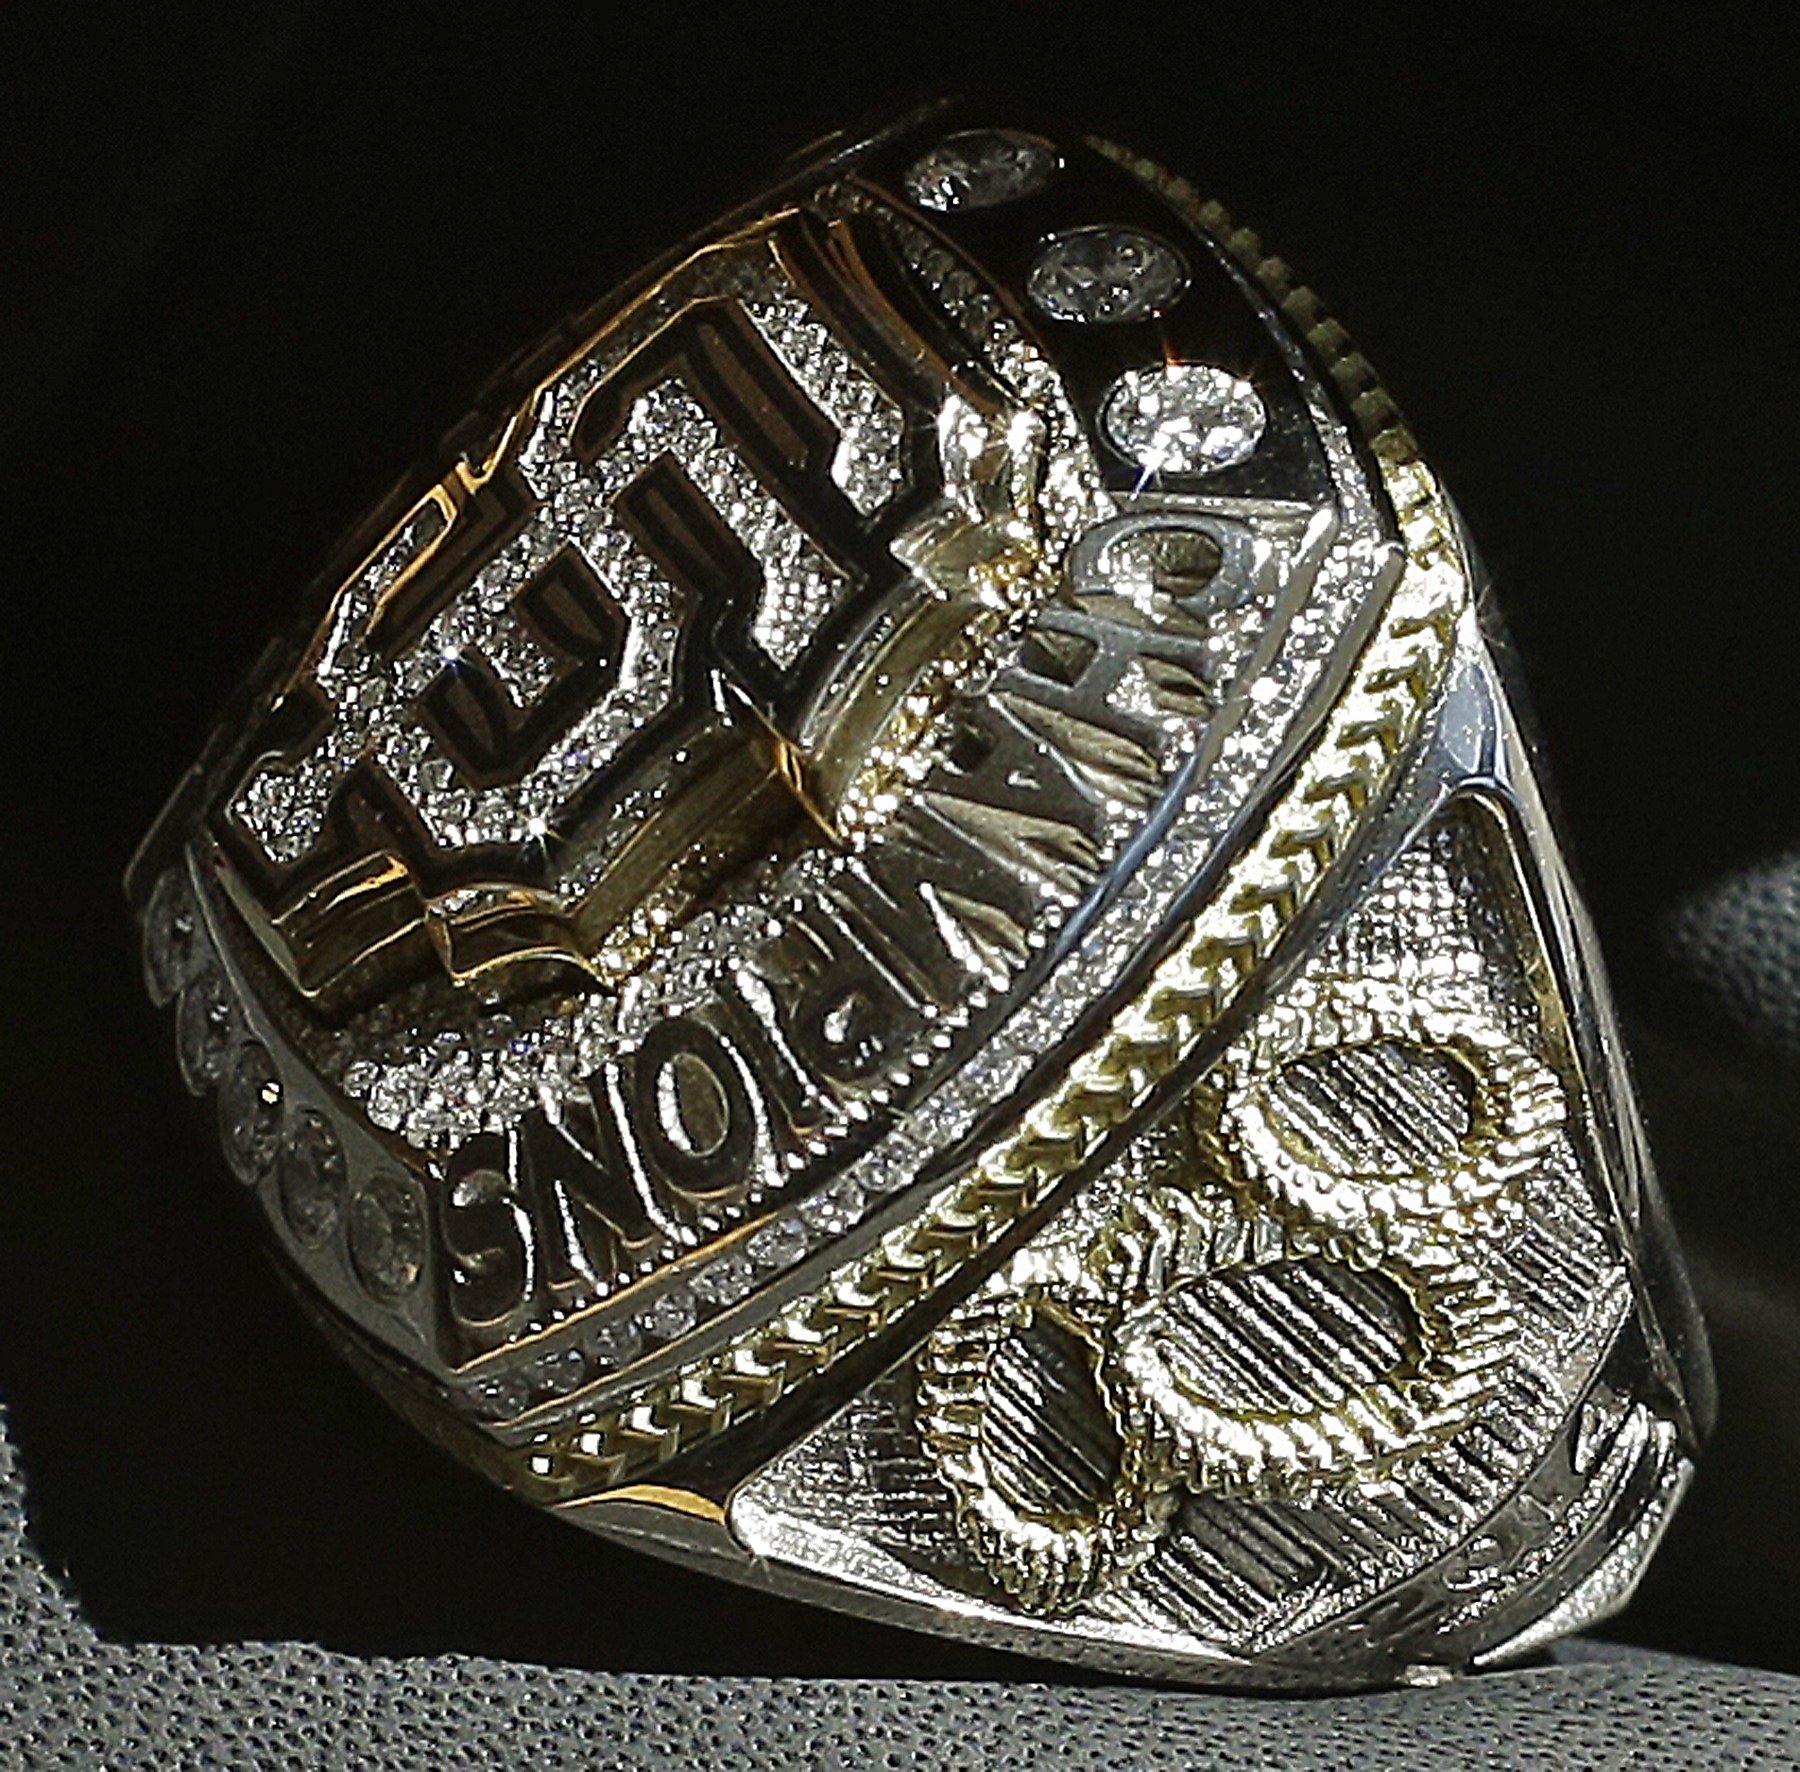 Giants receive 2014 World Series rings, Sports